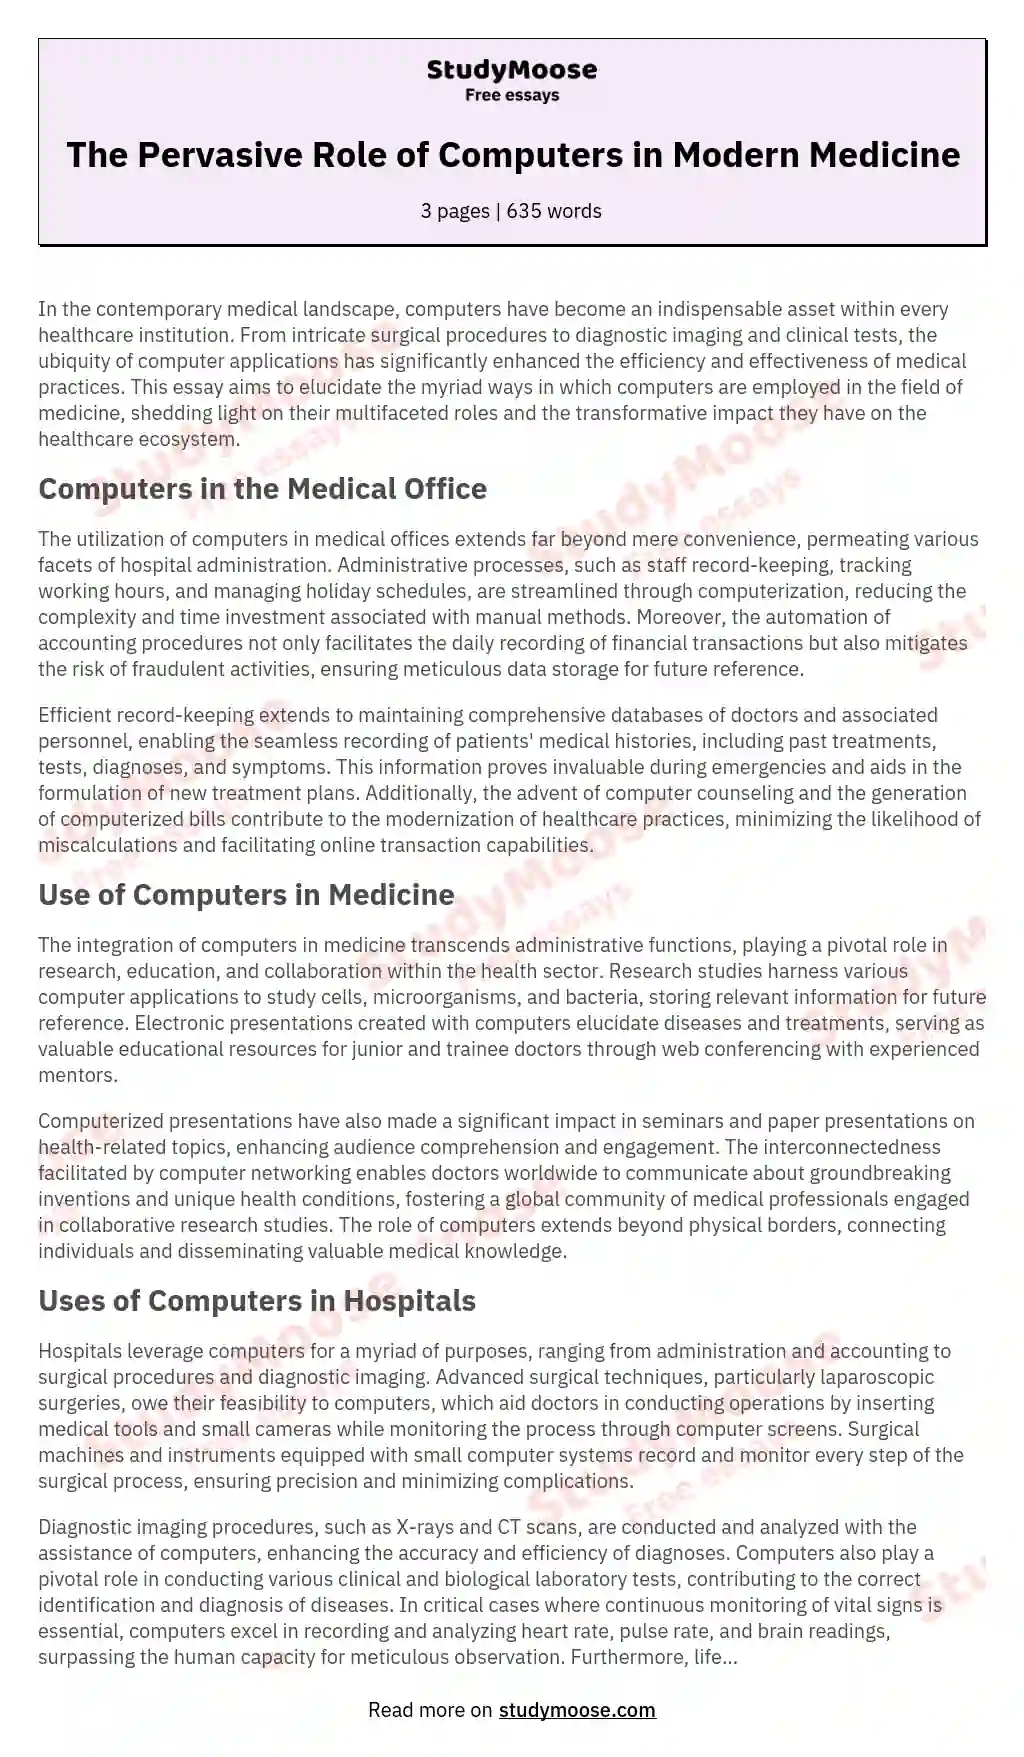 The Pervasive Role of Computers in Modern Medicine essay